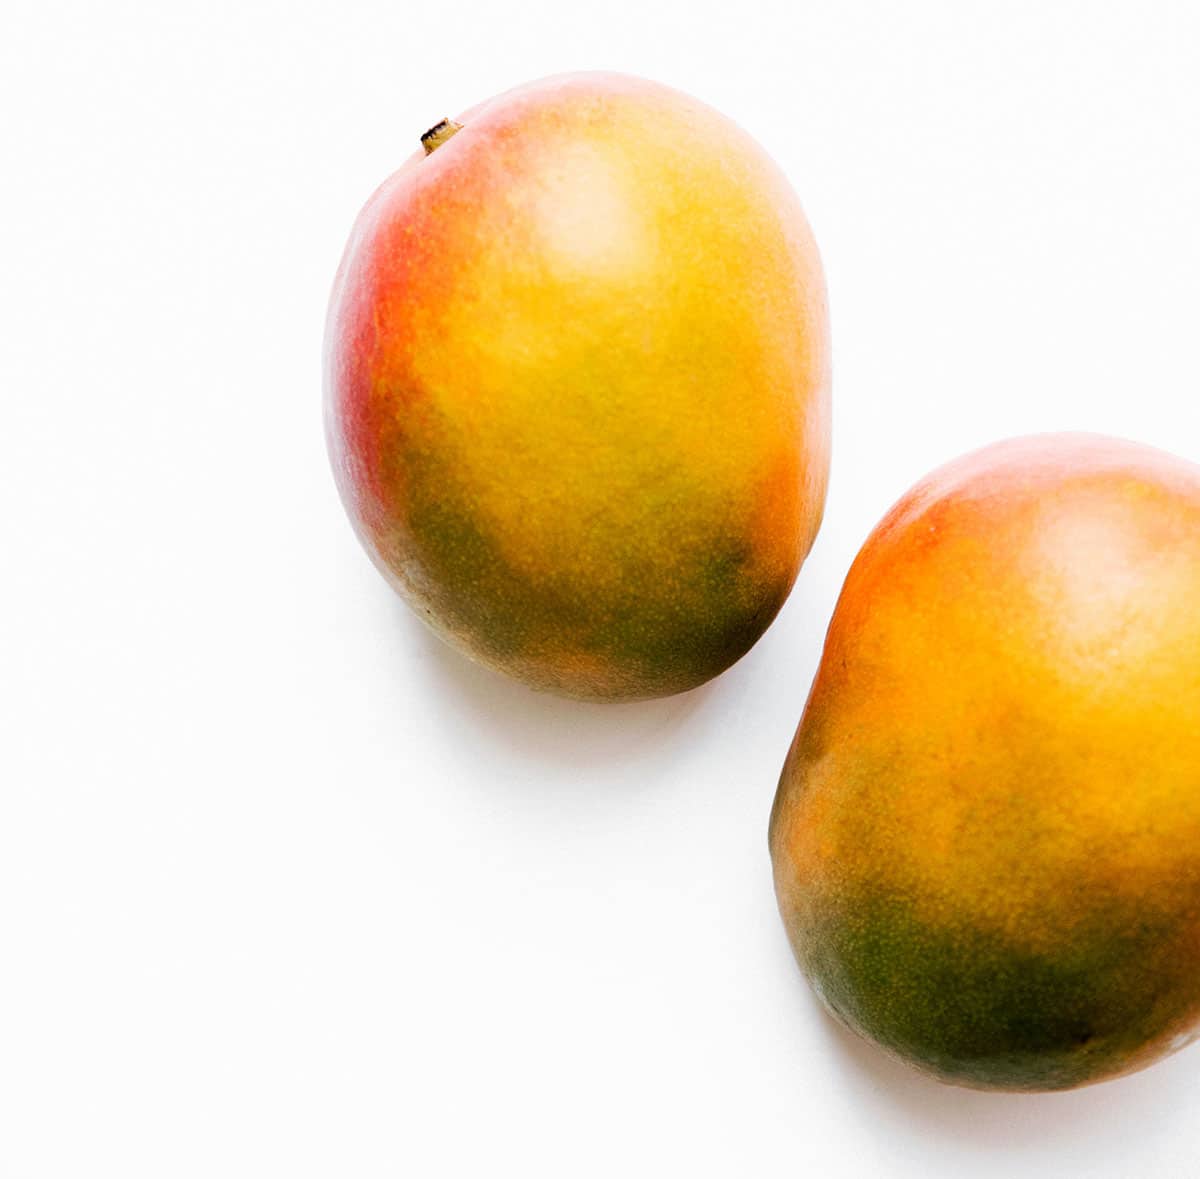 Two mangoes on a white background.